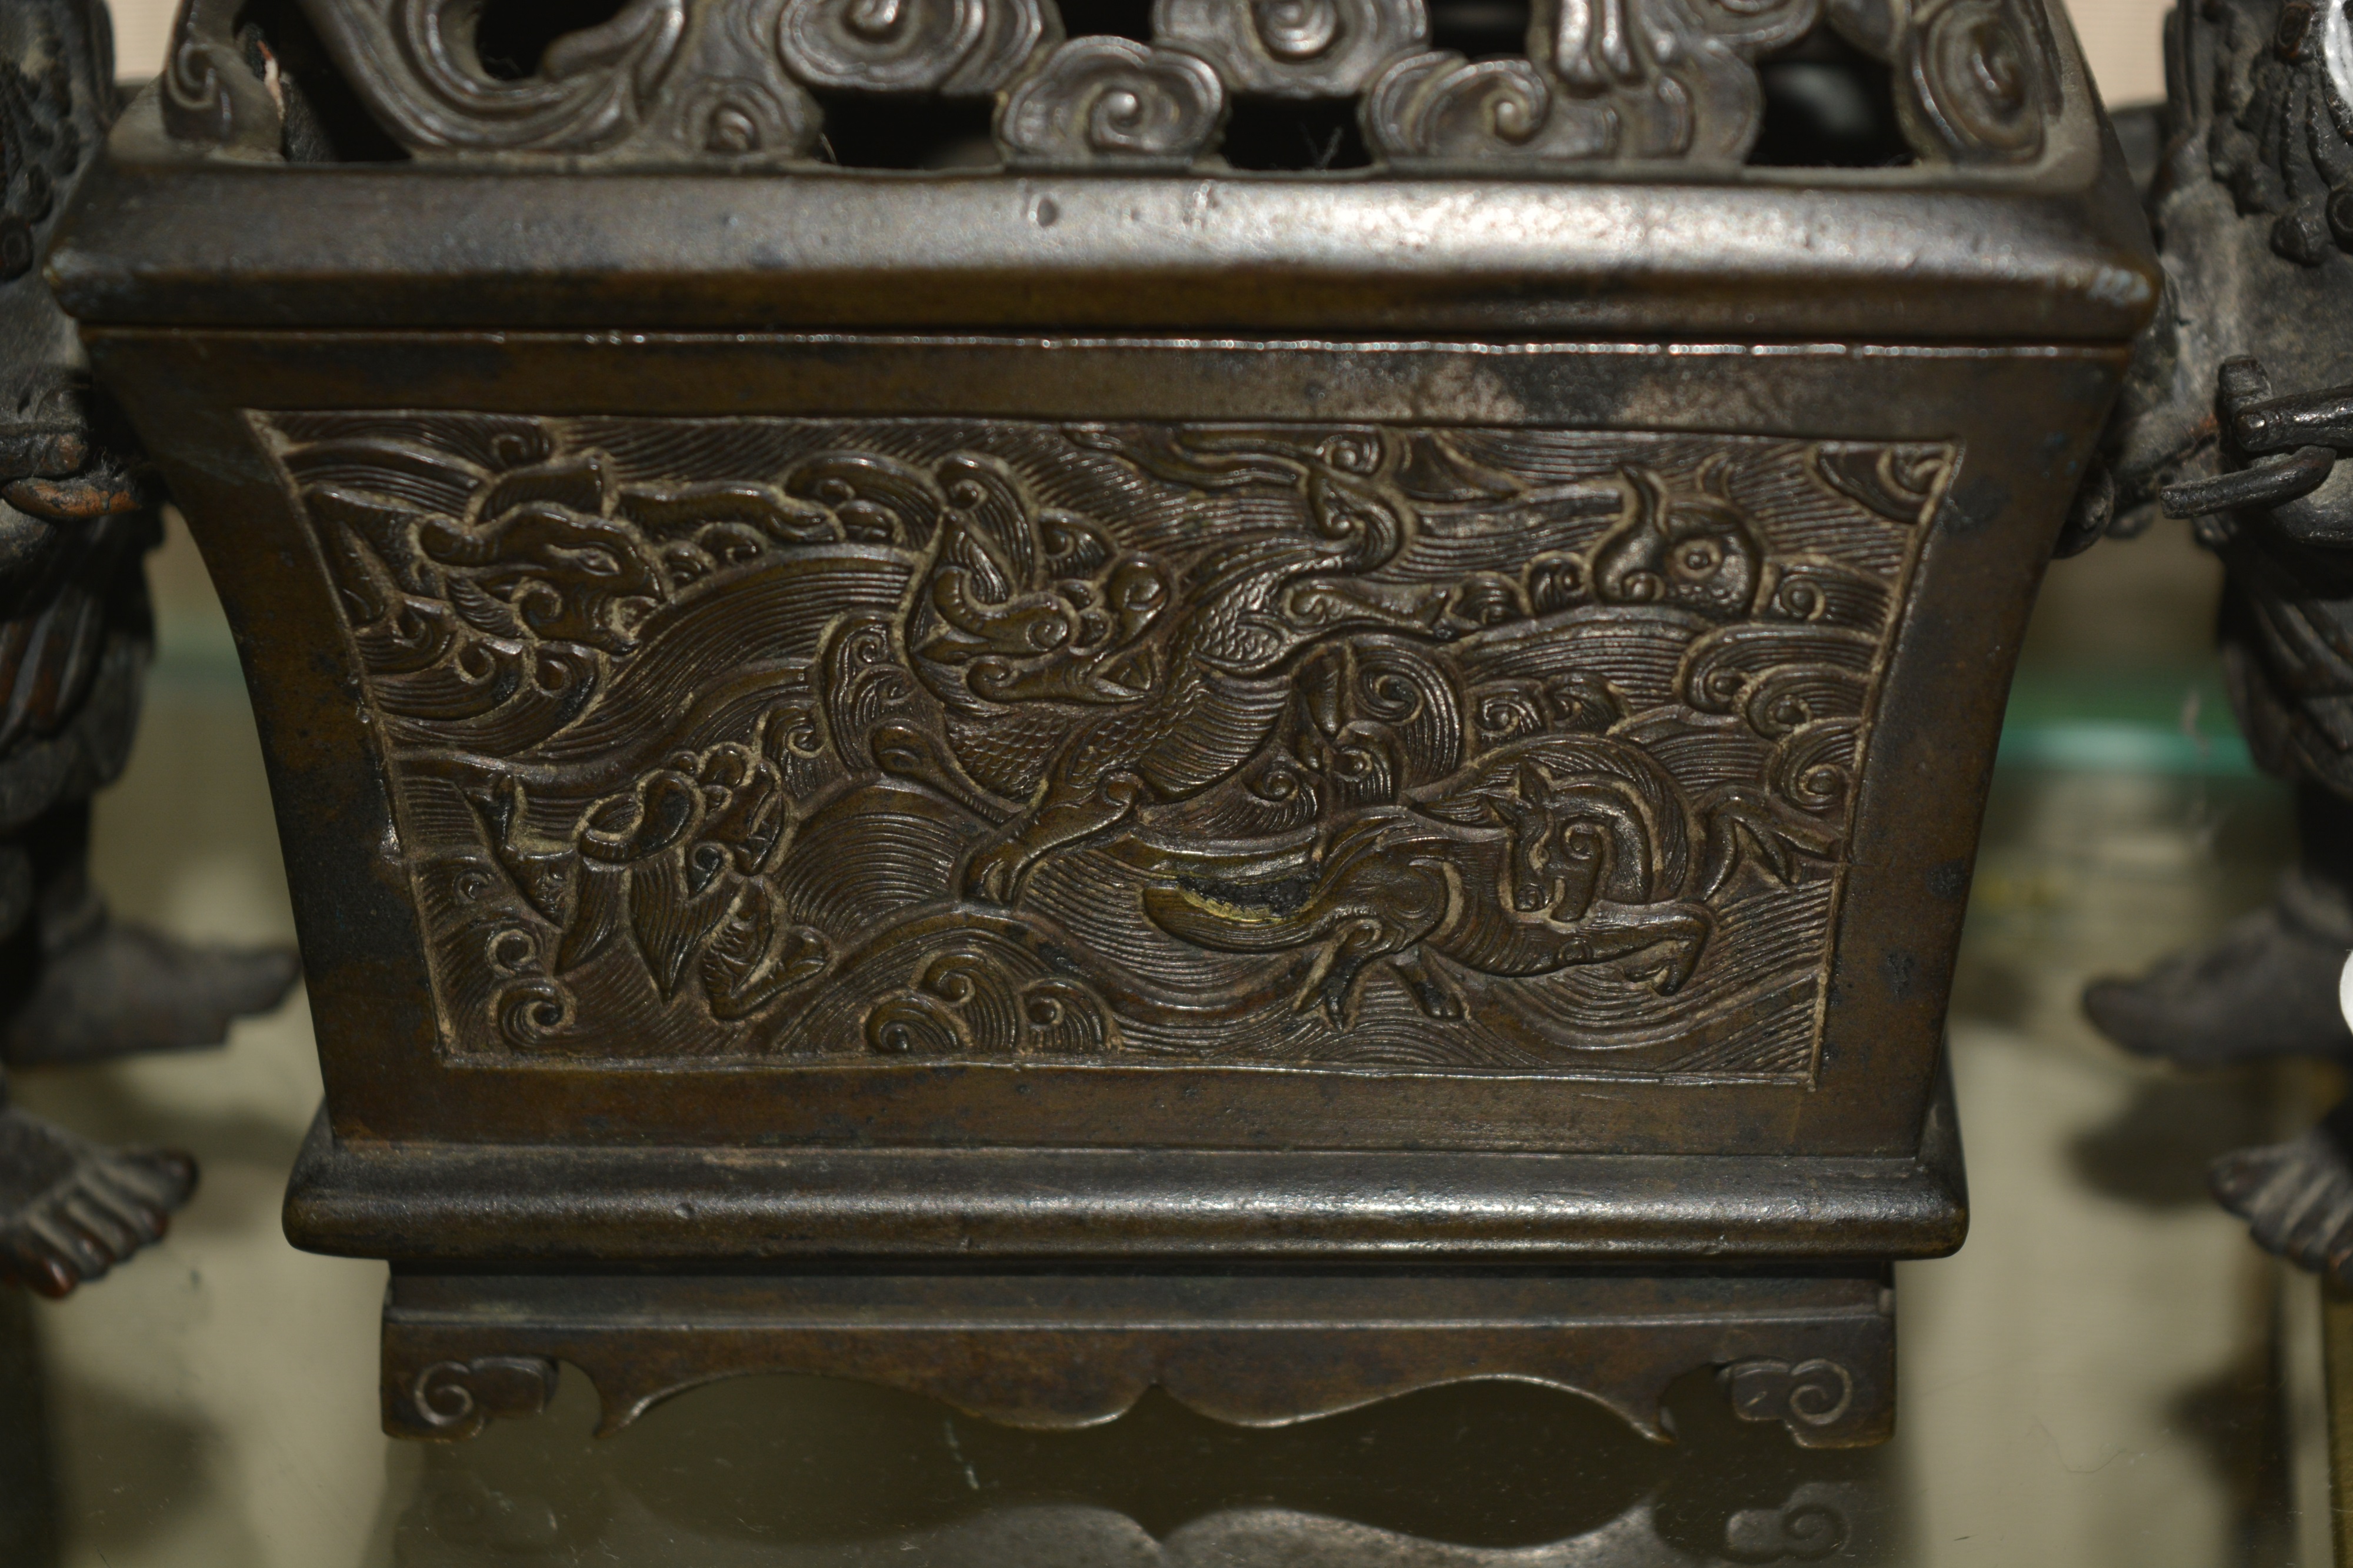 Bronze censer Chinese, 18th/19th Century in the form of a central rectangular casket with a - Image 22 of 27